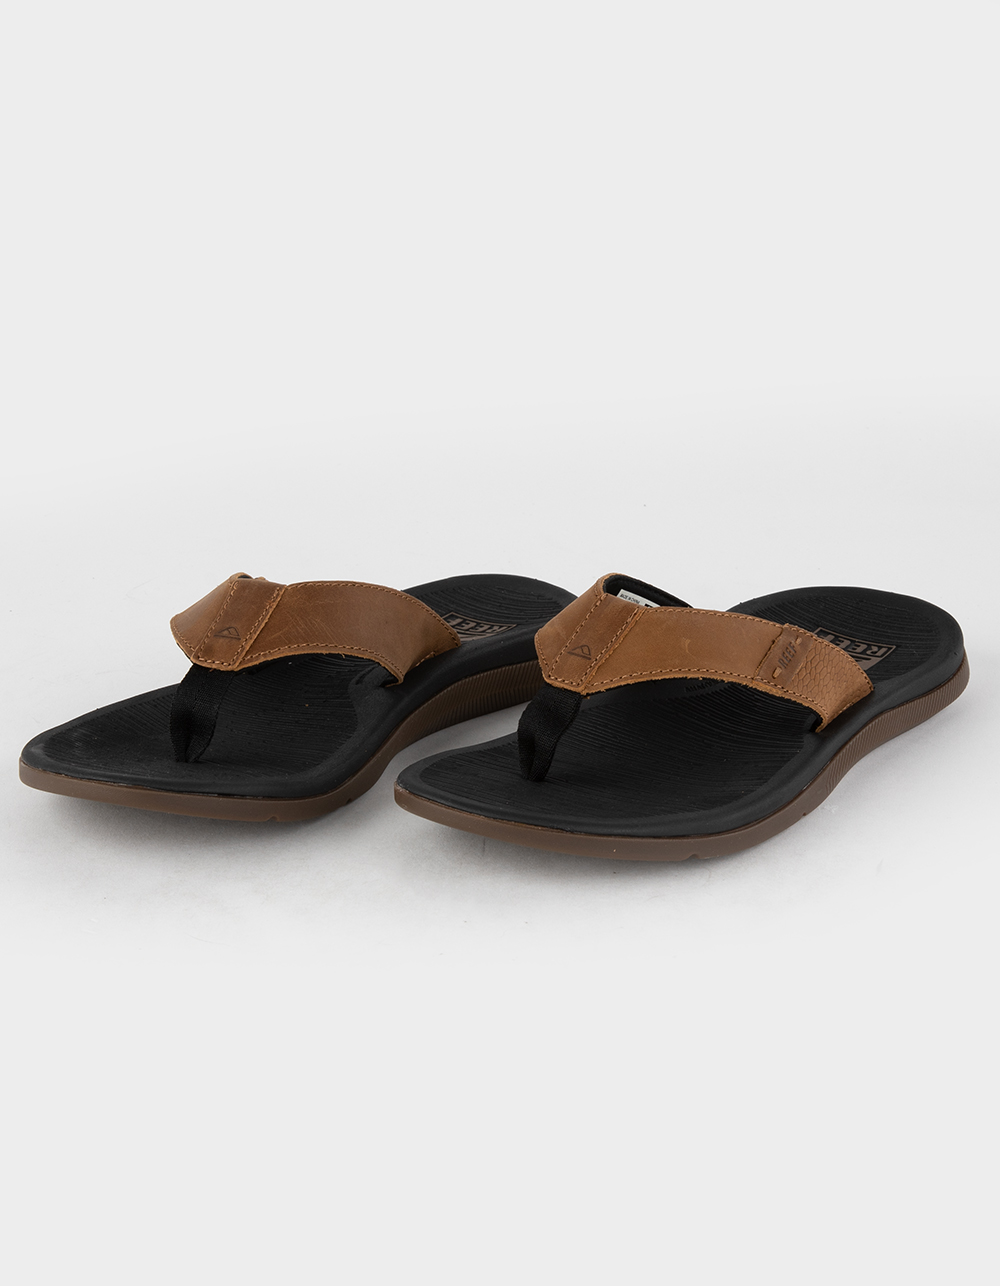 Reef Sandals & Clothing | Tillys